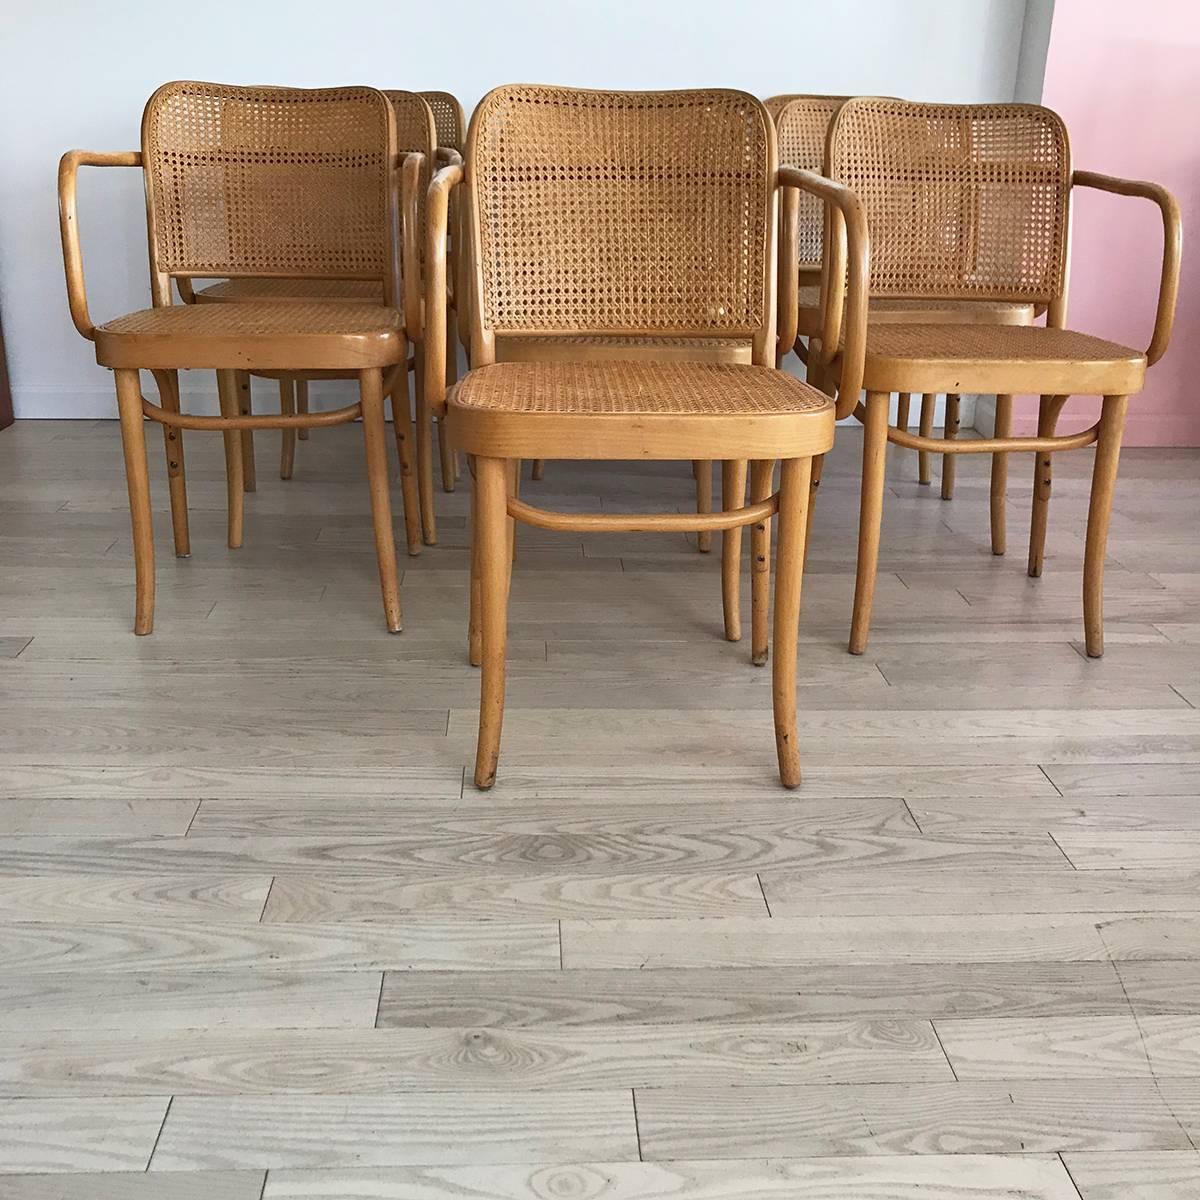 Full set of 10 armed midcentury Josef Hoffmann Prague 811 chairs with cane back and seats and bentwood frame. In Excellent condition, three pieces of cane have been replaced. No cracks or holes in cane. Some signs of ware on the wood from age and